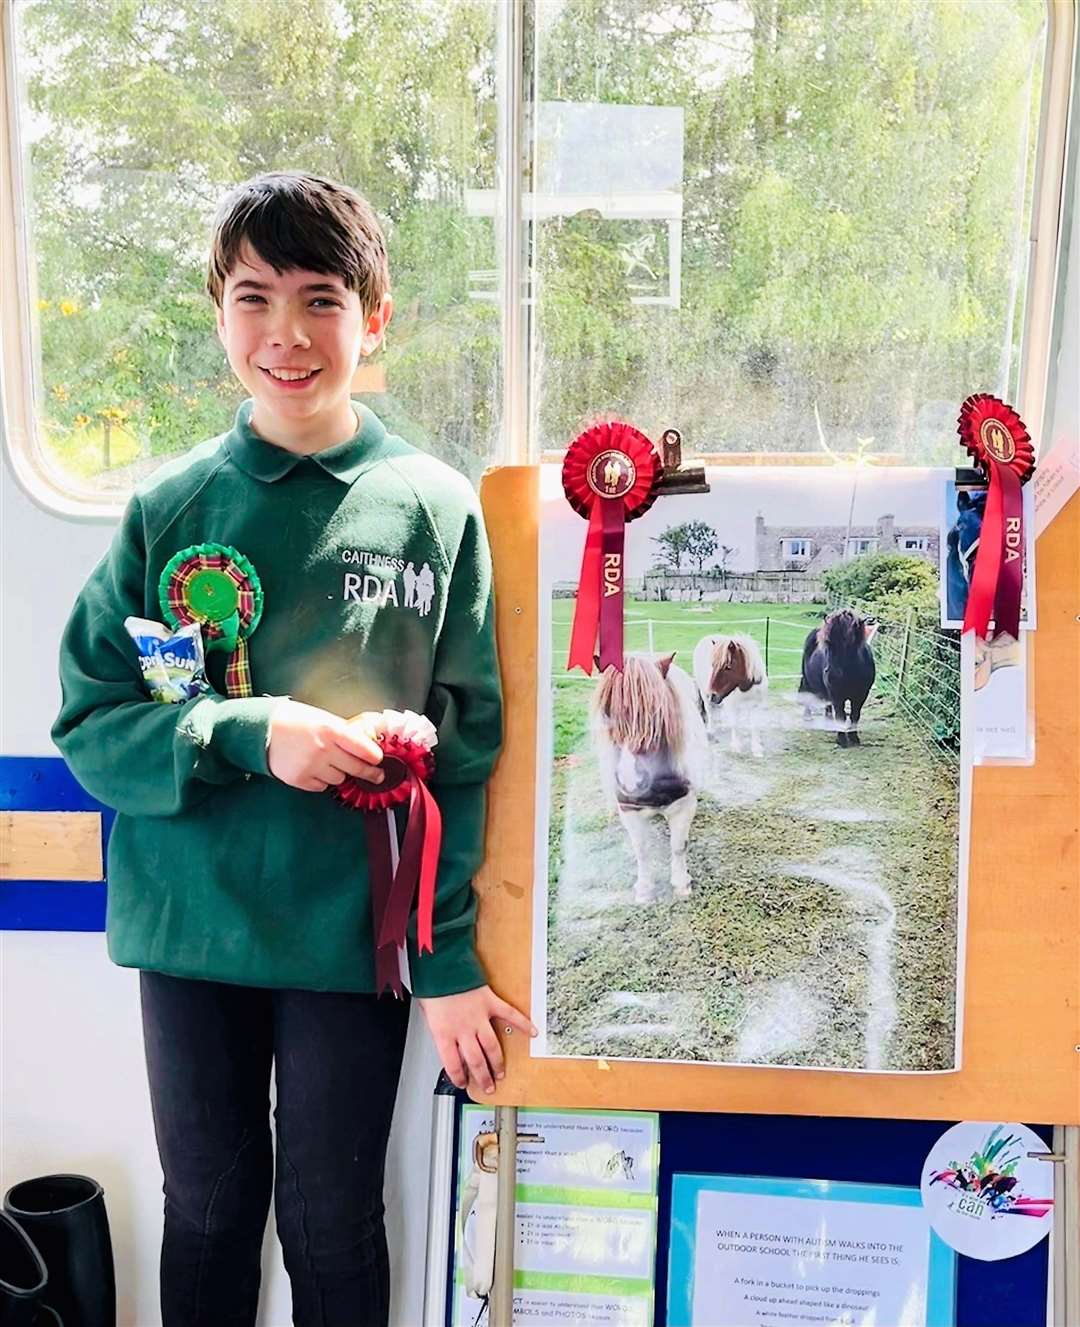 Caleb Dyer with a photo he took of his miniature Shetland ponies which he calls 'The Three Musketeers'. Caleb won first prize in the arts and crafts competition with the image.